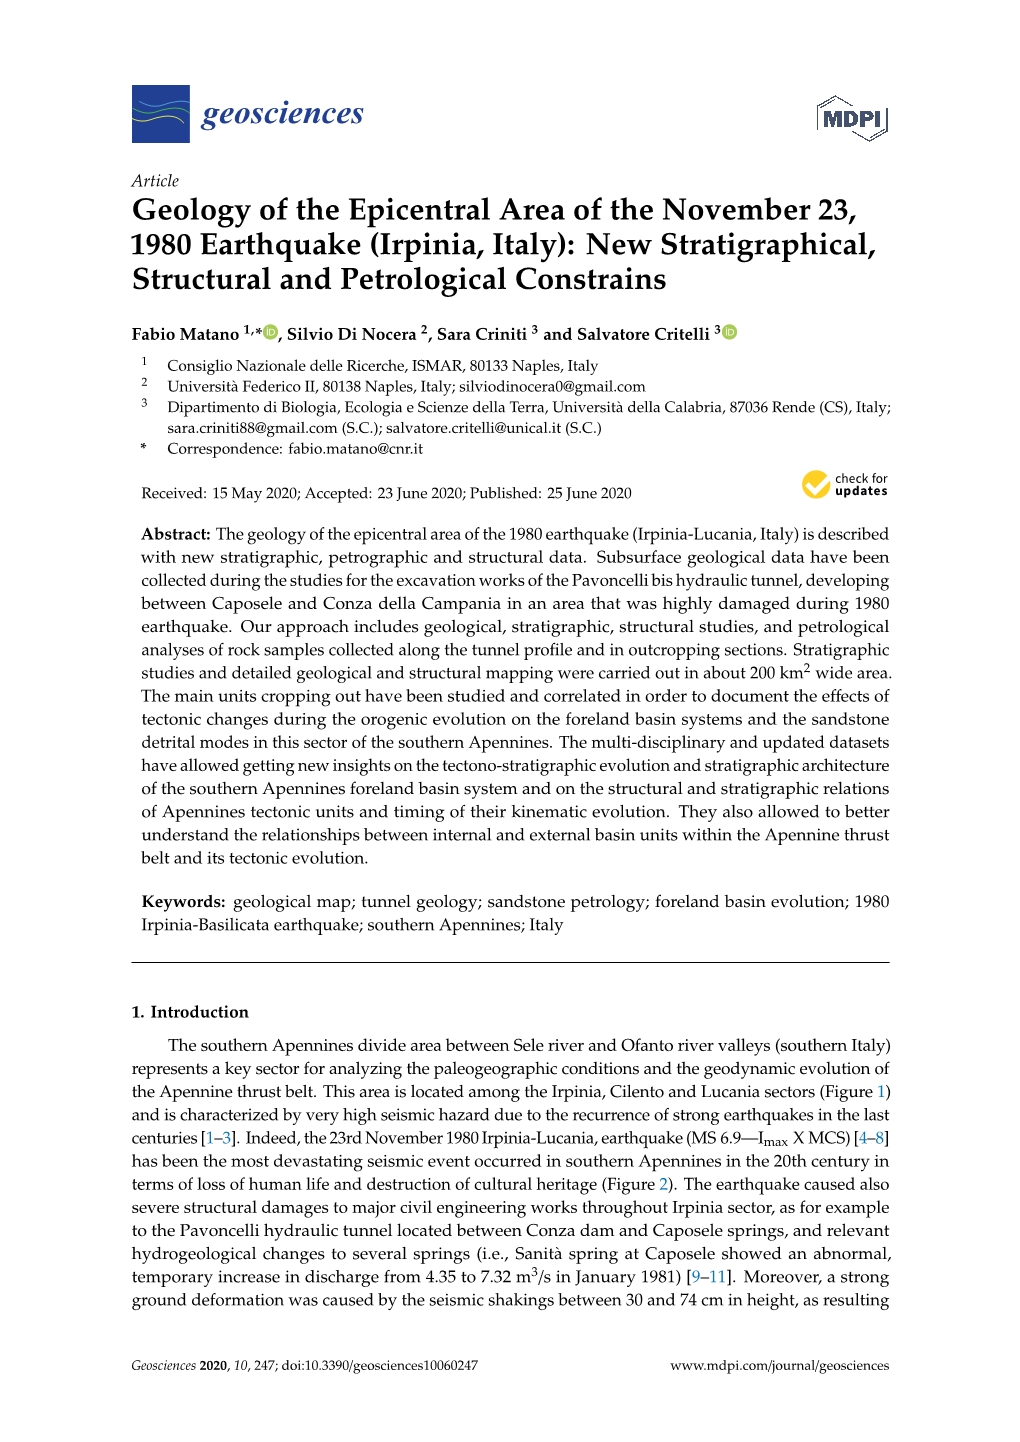 (Irpinia, Italy): New Stratigraphical, Structural and Petrological Constrains